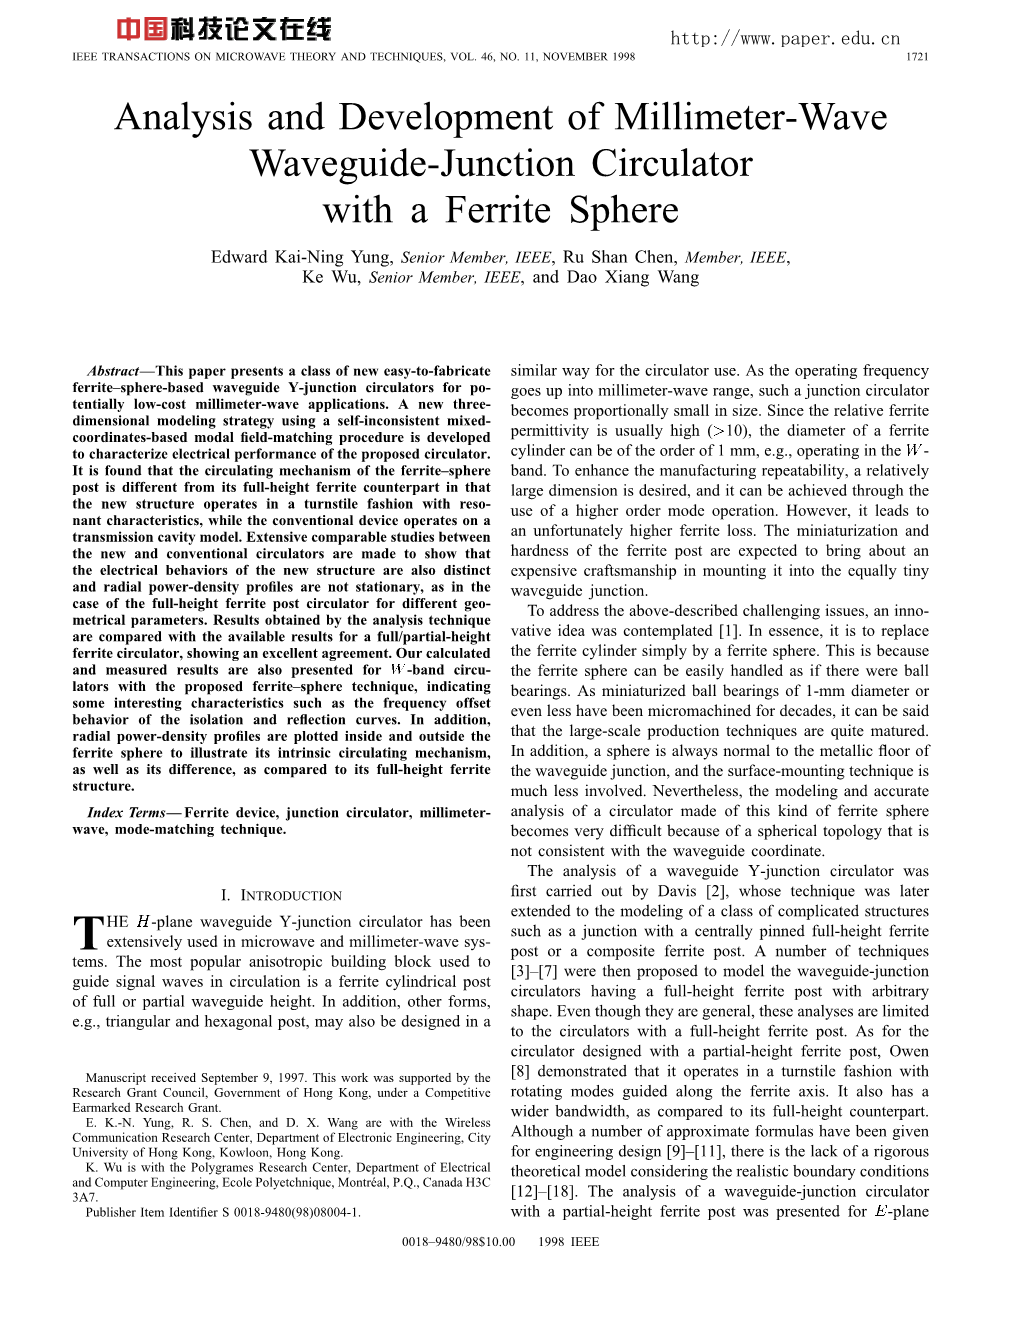 Analysis and Development of Millimeter-Wave Waveguide-Junction Circulator with a Ferrite Sphere